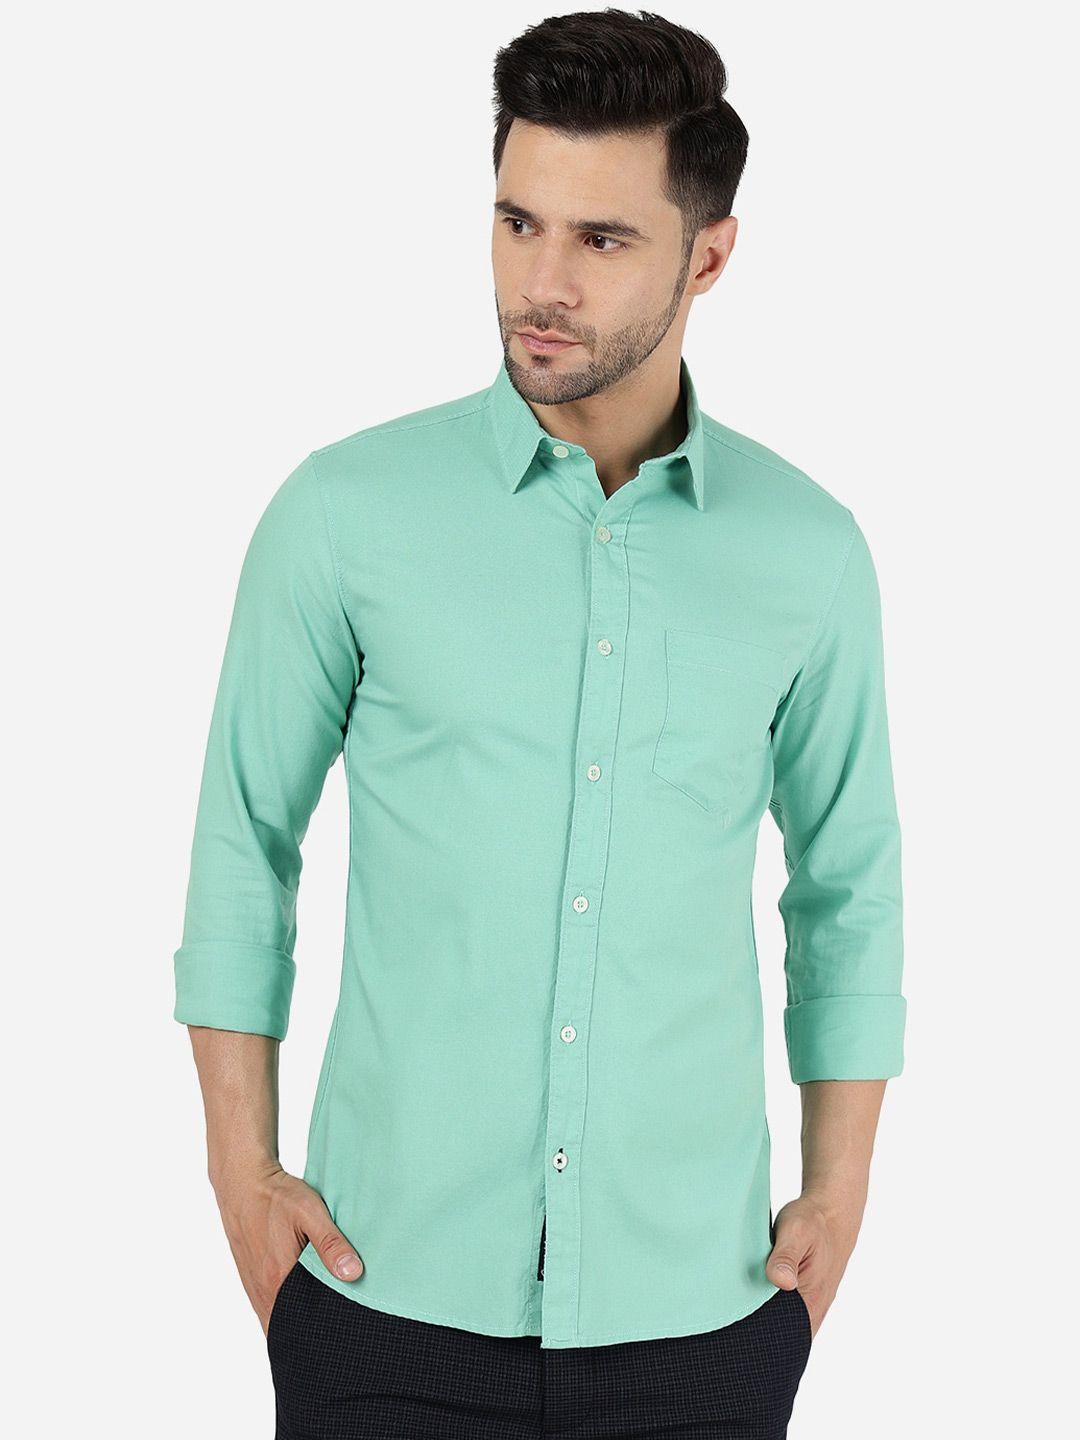 JADE BLUE Slim Fit Opaque Pure Cotton Casual Shirt